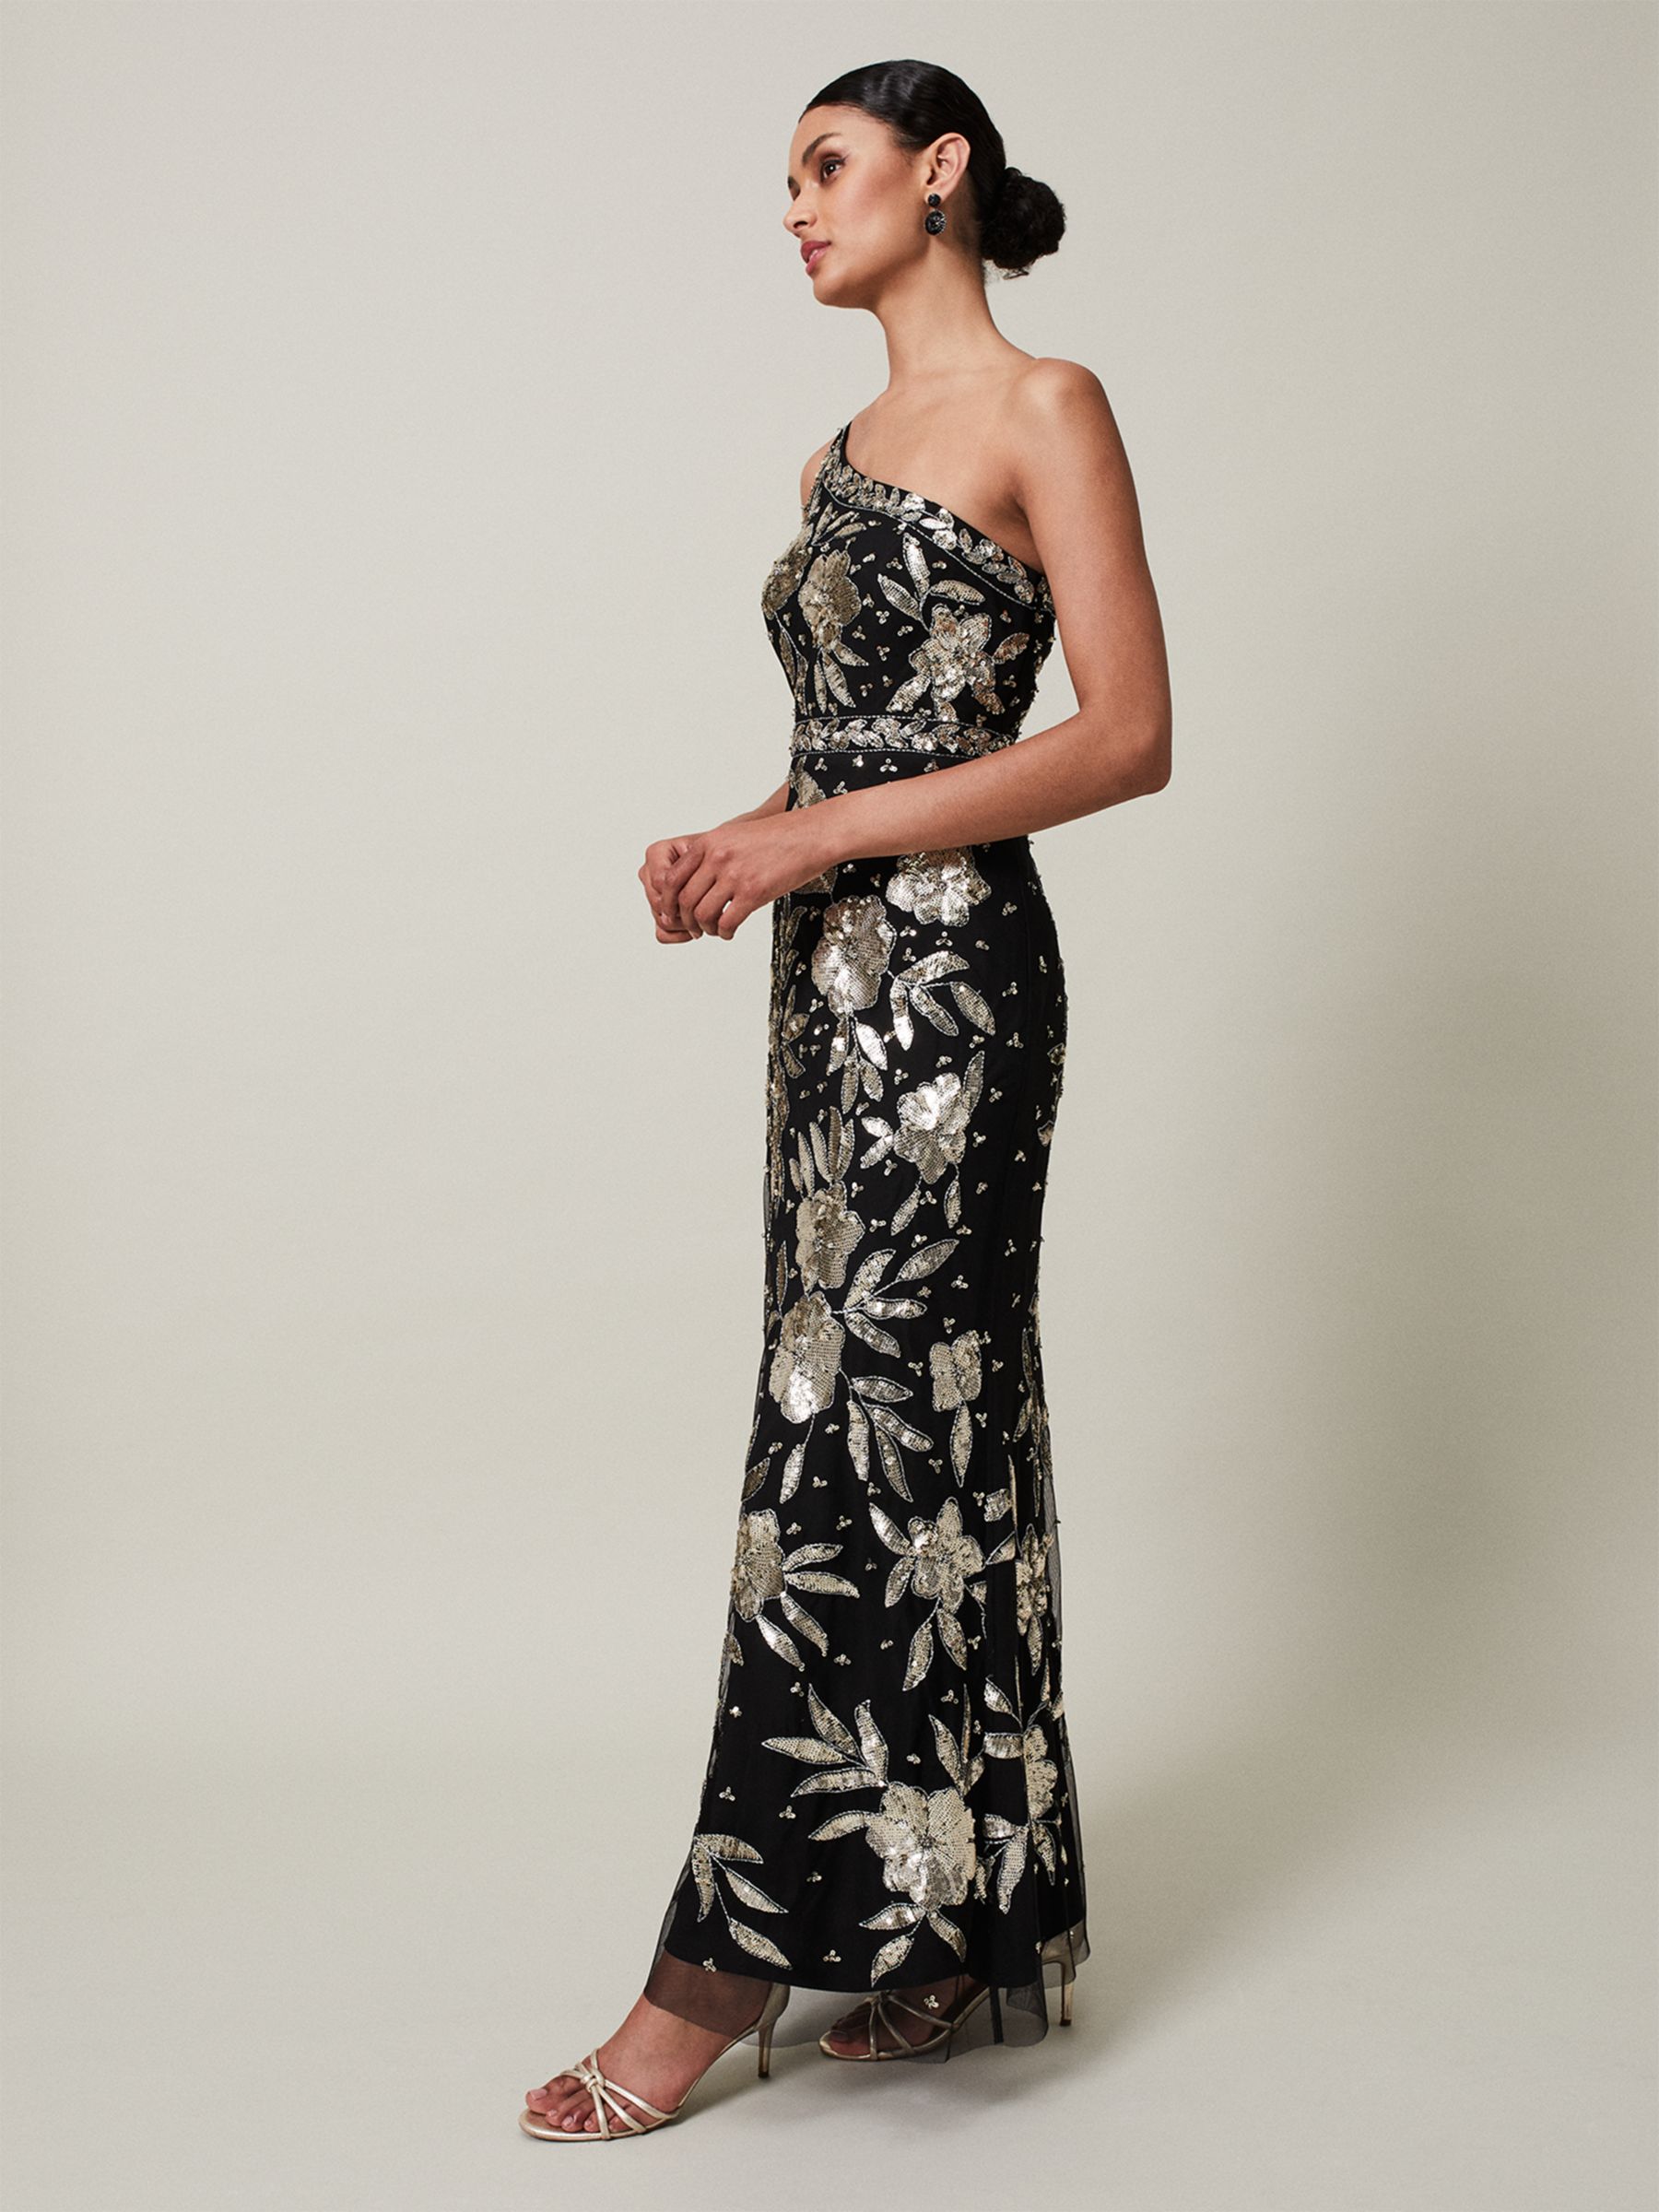 Phase Eight Collection 8 Serafina Floral Sequin Embellished Maxi Dress,  Black/Gold At John Lewis & Partners